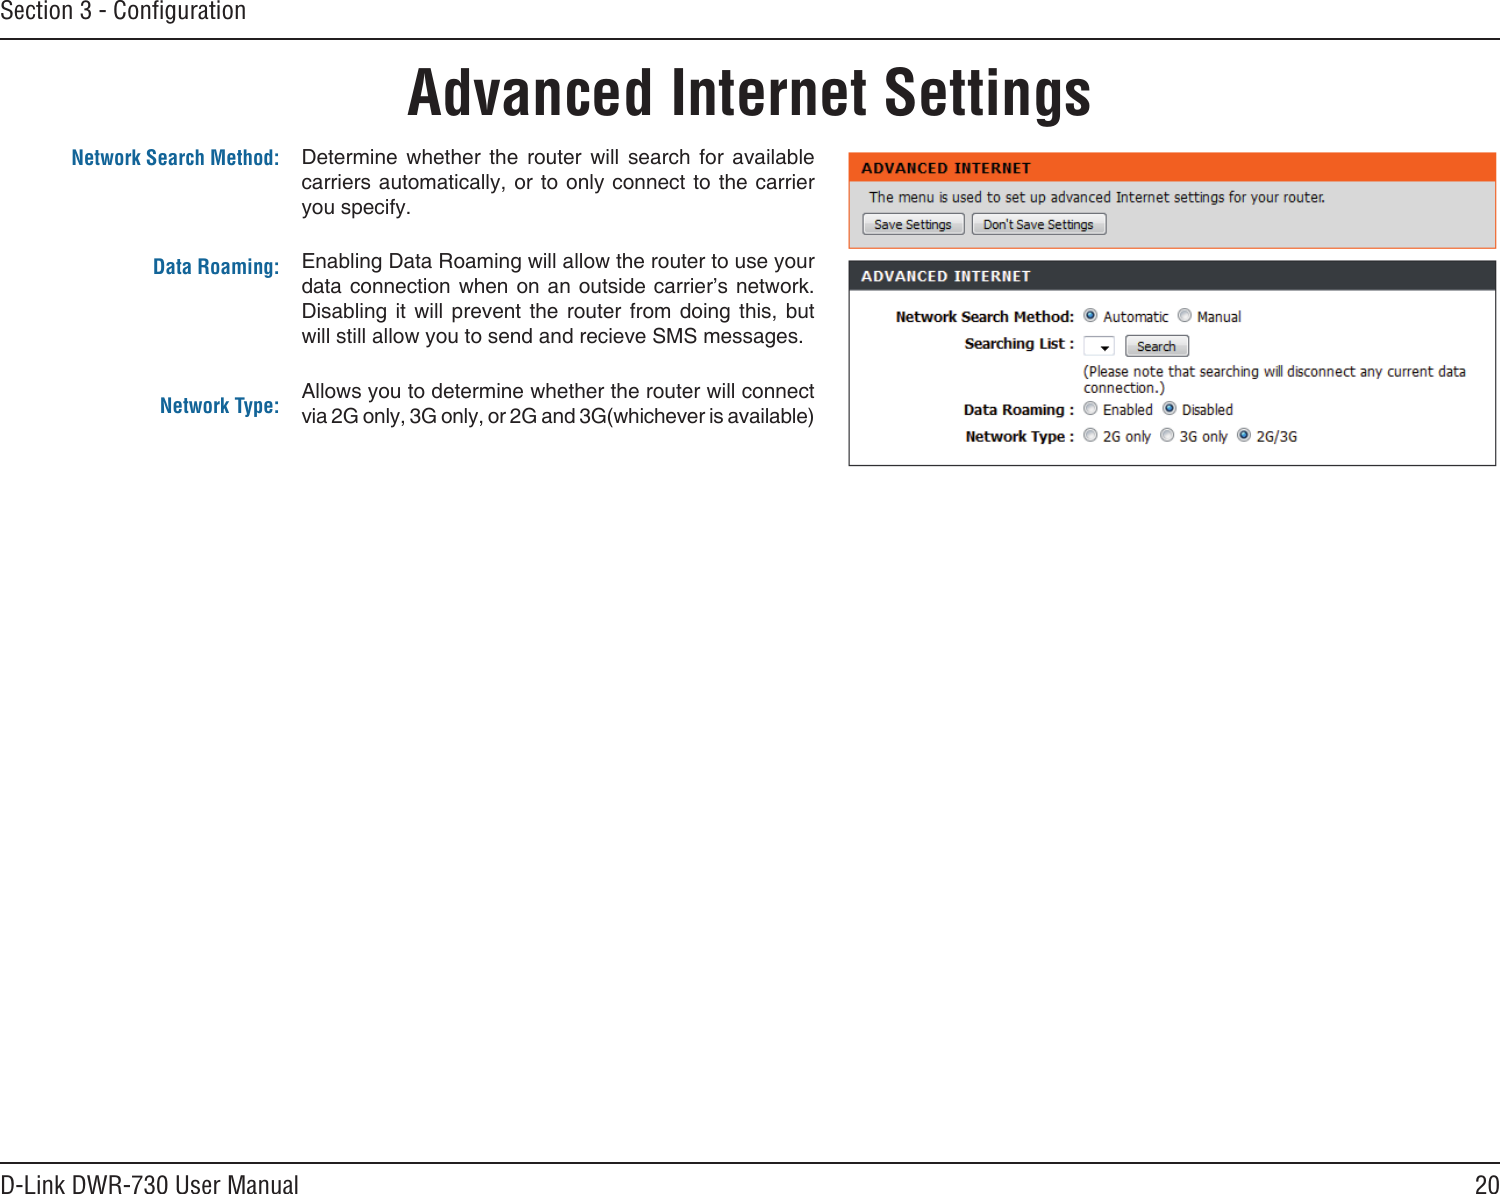 20D-Link DWR-730 User ManualSection 3 - ConﬁgurationAdvanced Internet Settings                    Network Search Method:Data Roaming:Network Type: